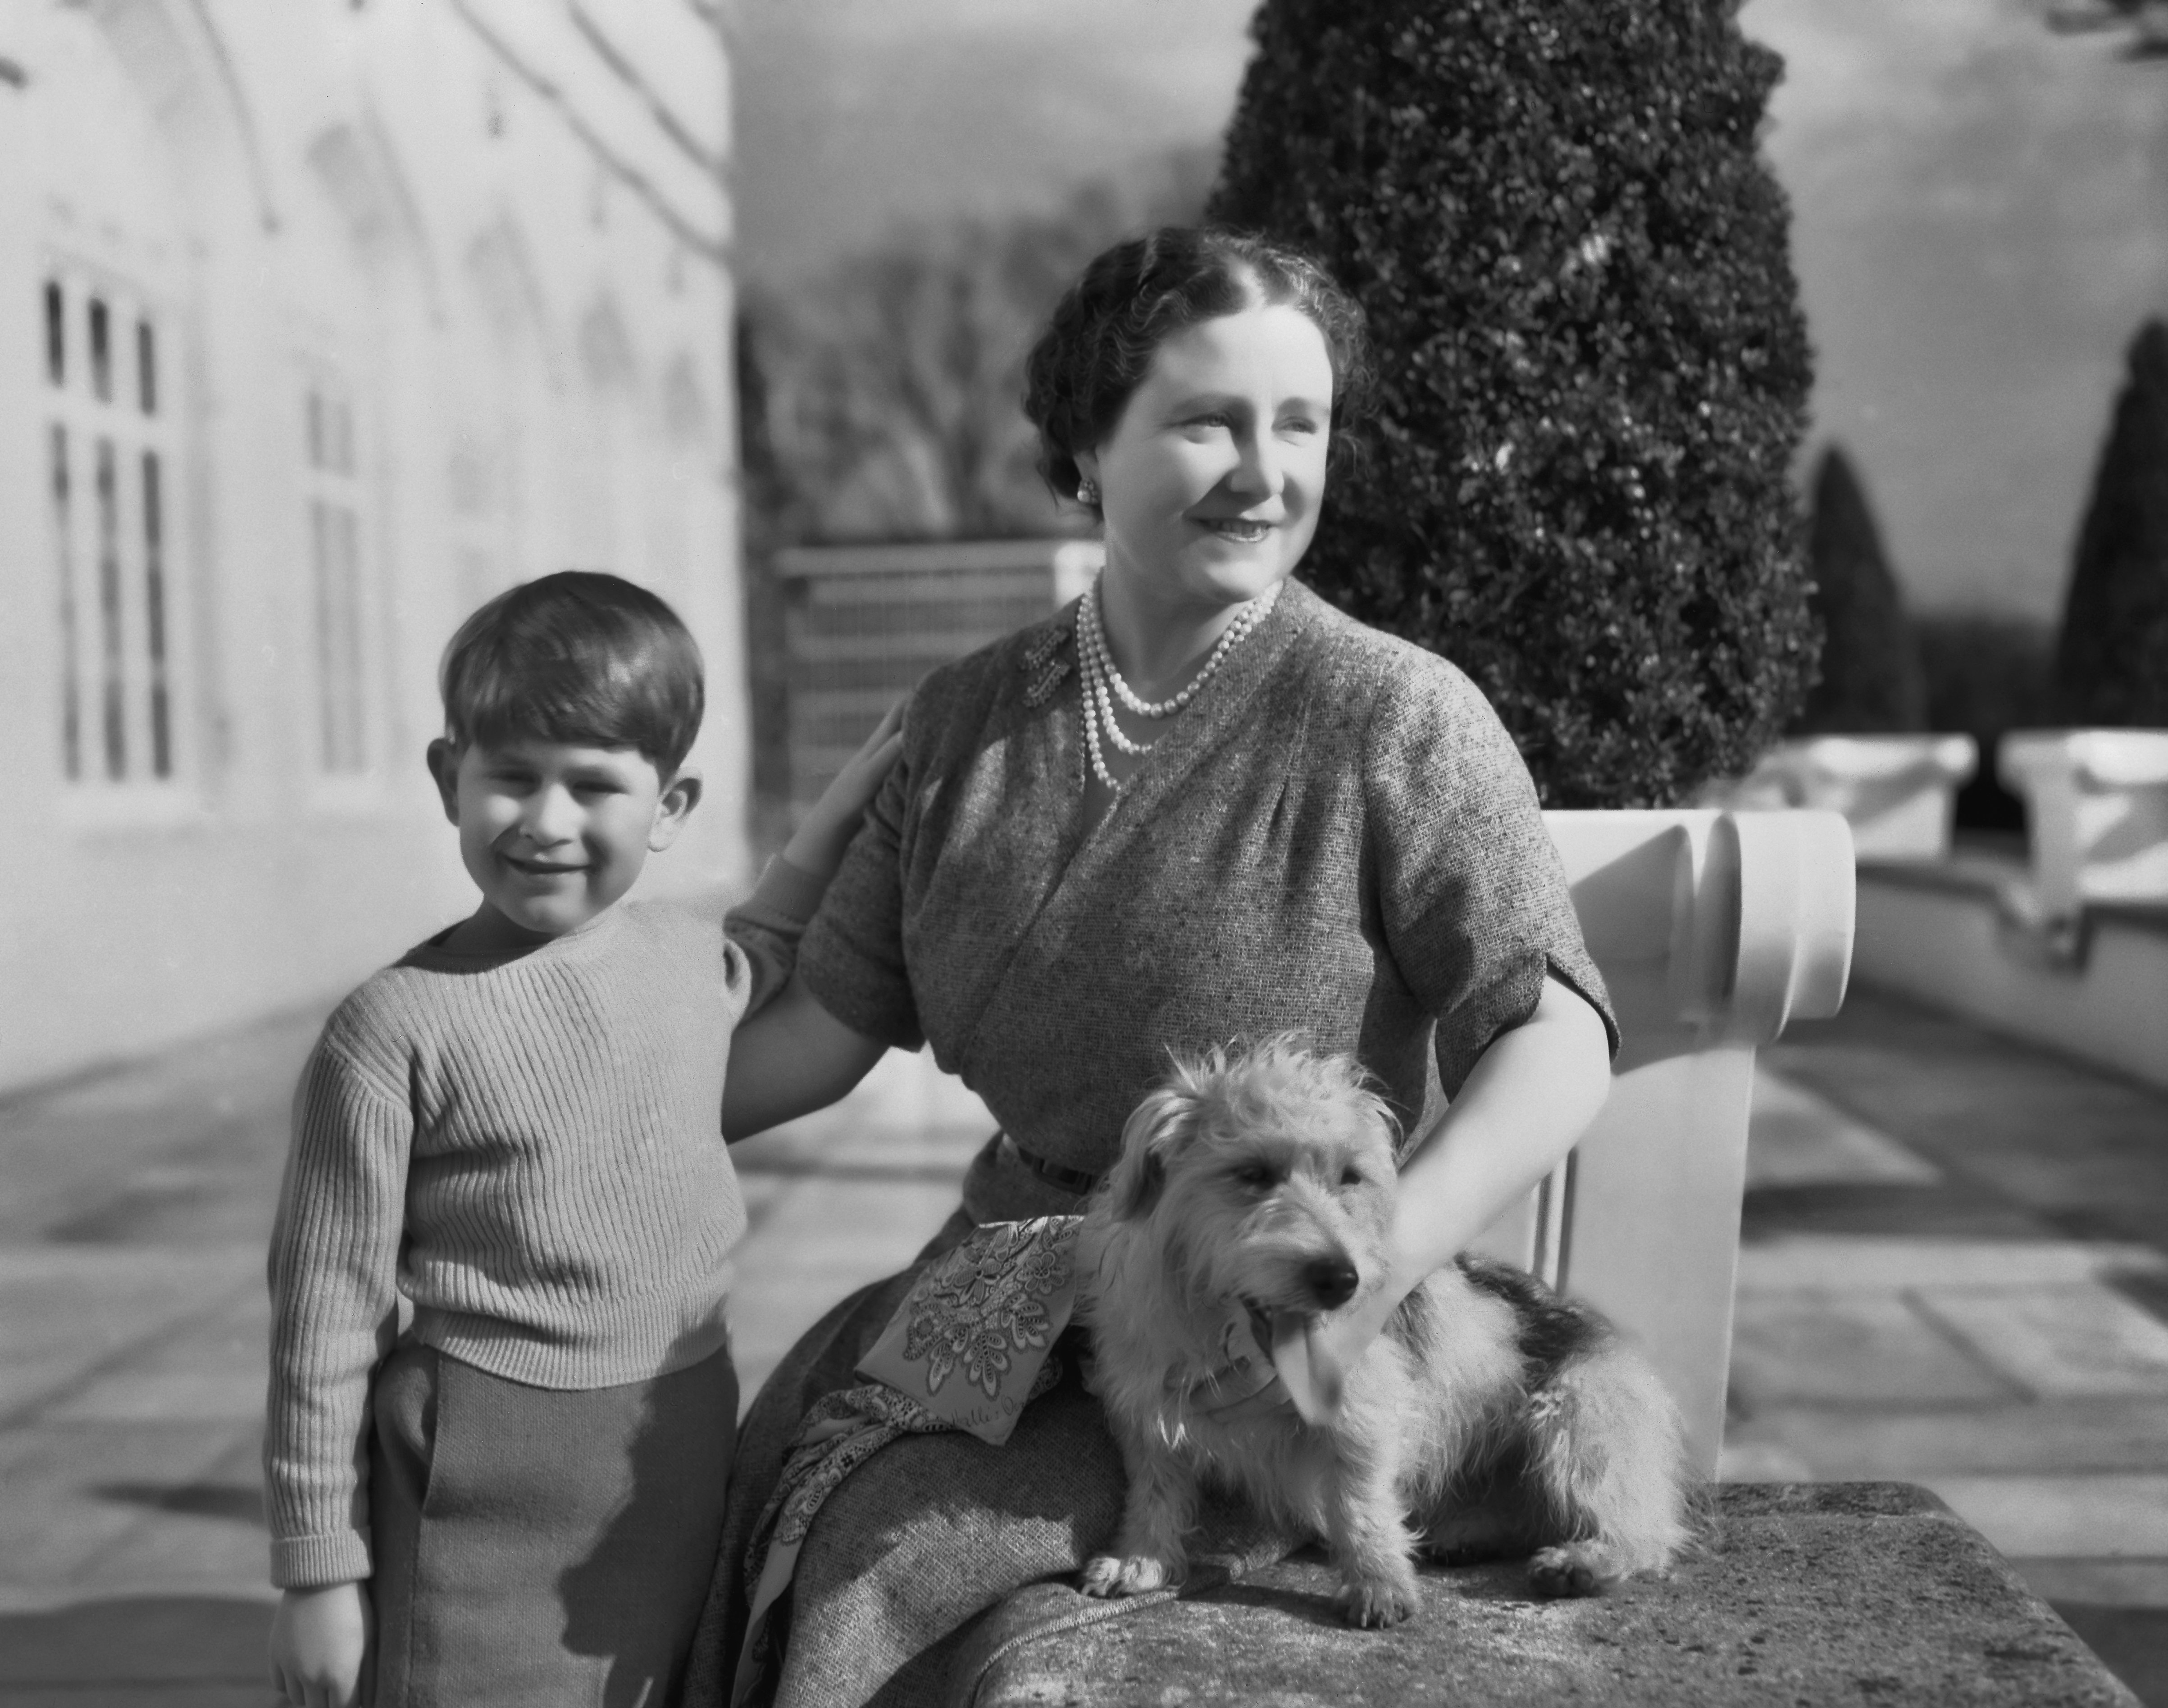 Queen Elizabeth The Queen Mother with her grandson Prince Charles on the patio of the Royal Lodge in Windsor, England on April 07, 1954 | Source: Getty Images